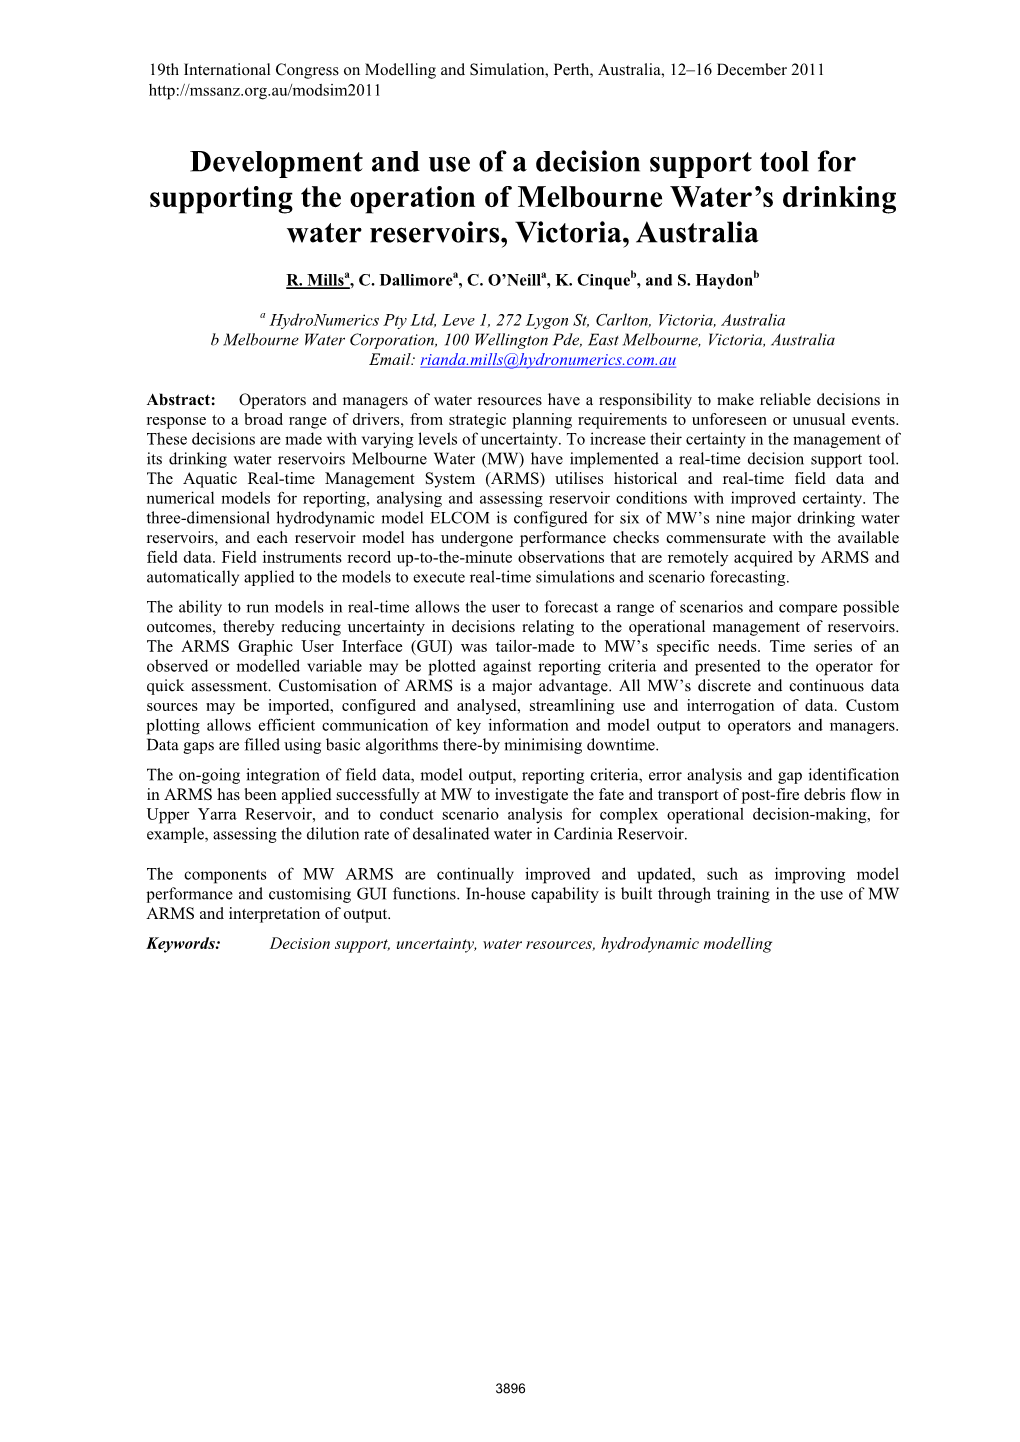 Development and Use of a Decision Support Tool for Supporting the Operation of Melbourne Water’S Drinking Water Reservoirs, Victoria, Australia